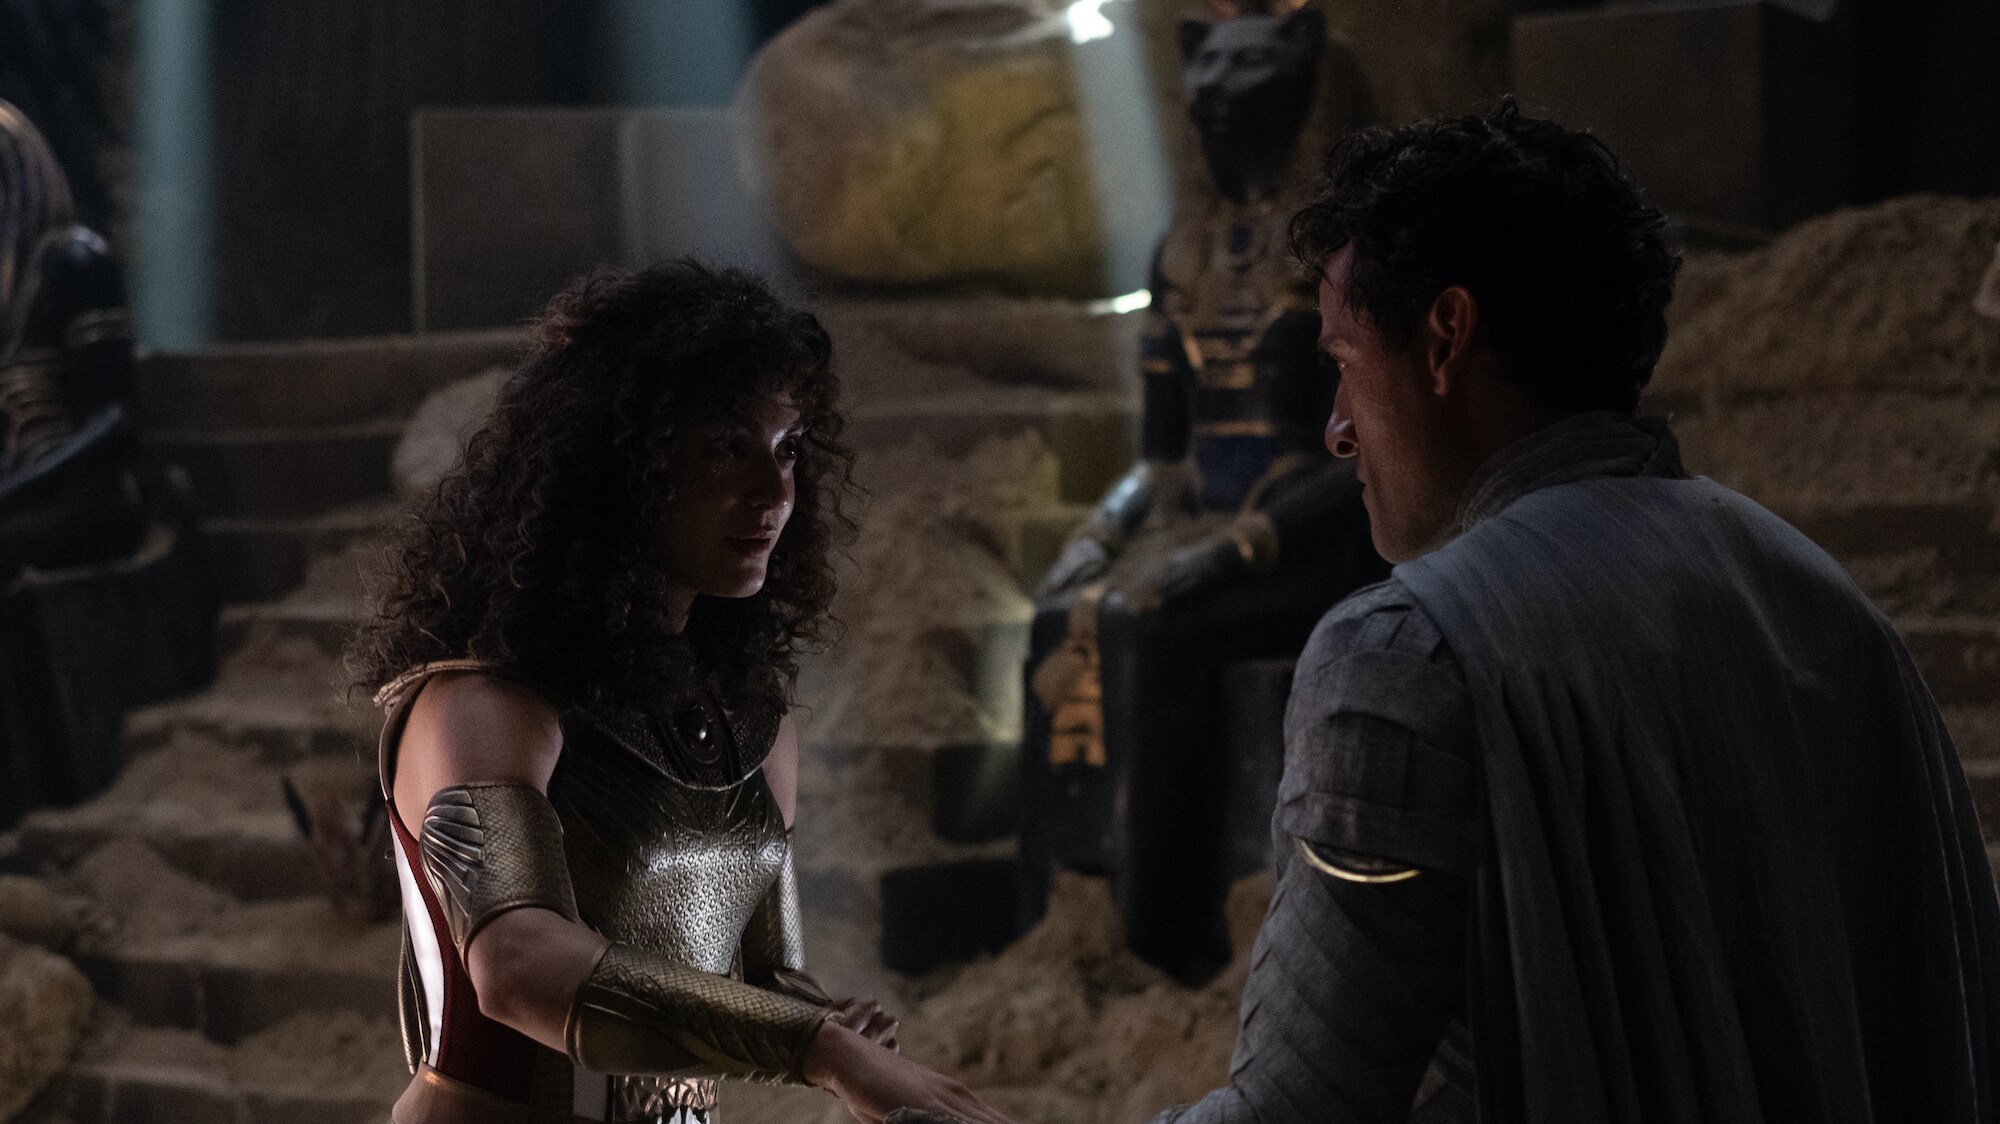 (L-R): May Calamawy as Layla El-Faouly and Oscar Isaac as Marc Spector in Marvel Studios' MOON KNIGHT, exclusively on Disney+. Photo by Csaba Aknay. ©Marvel Studios 2022. All Rights Reserved.